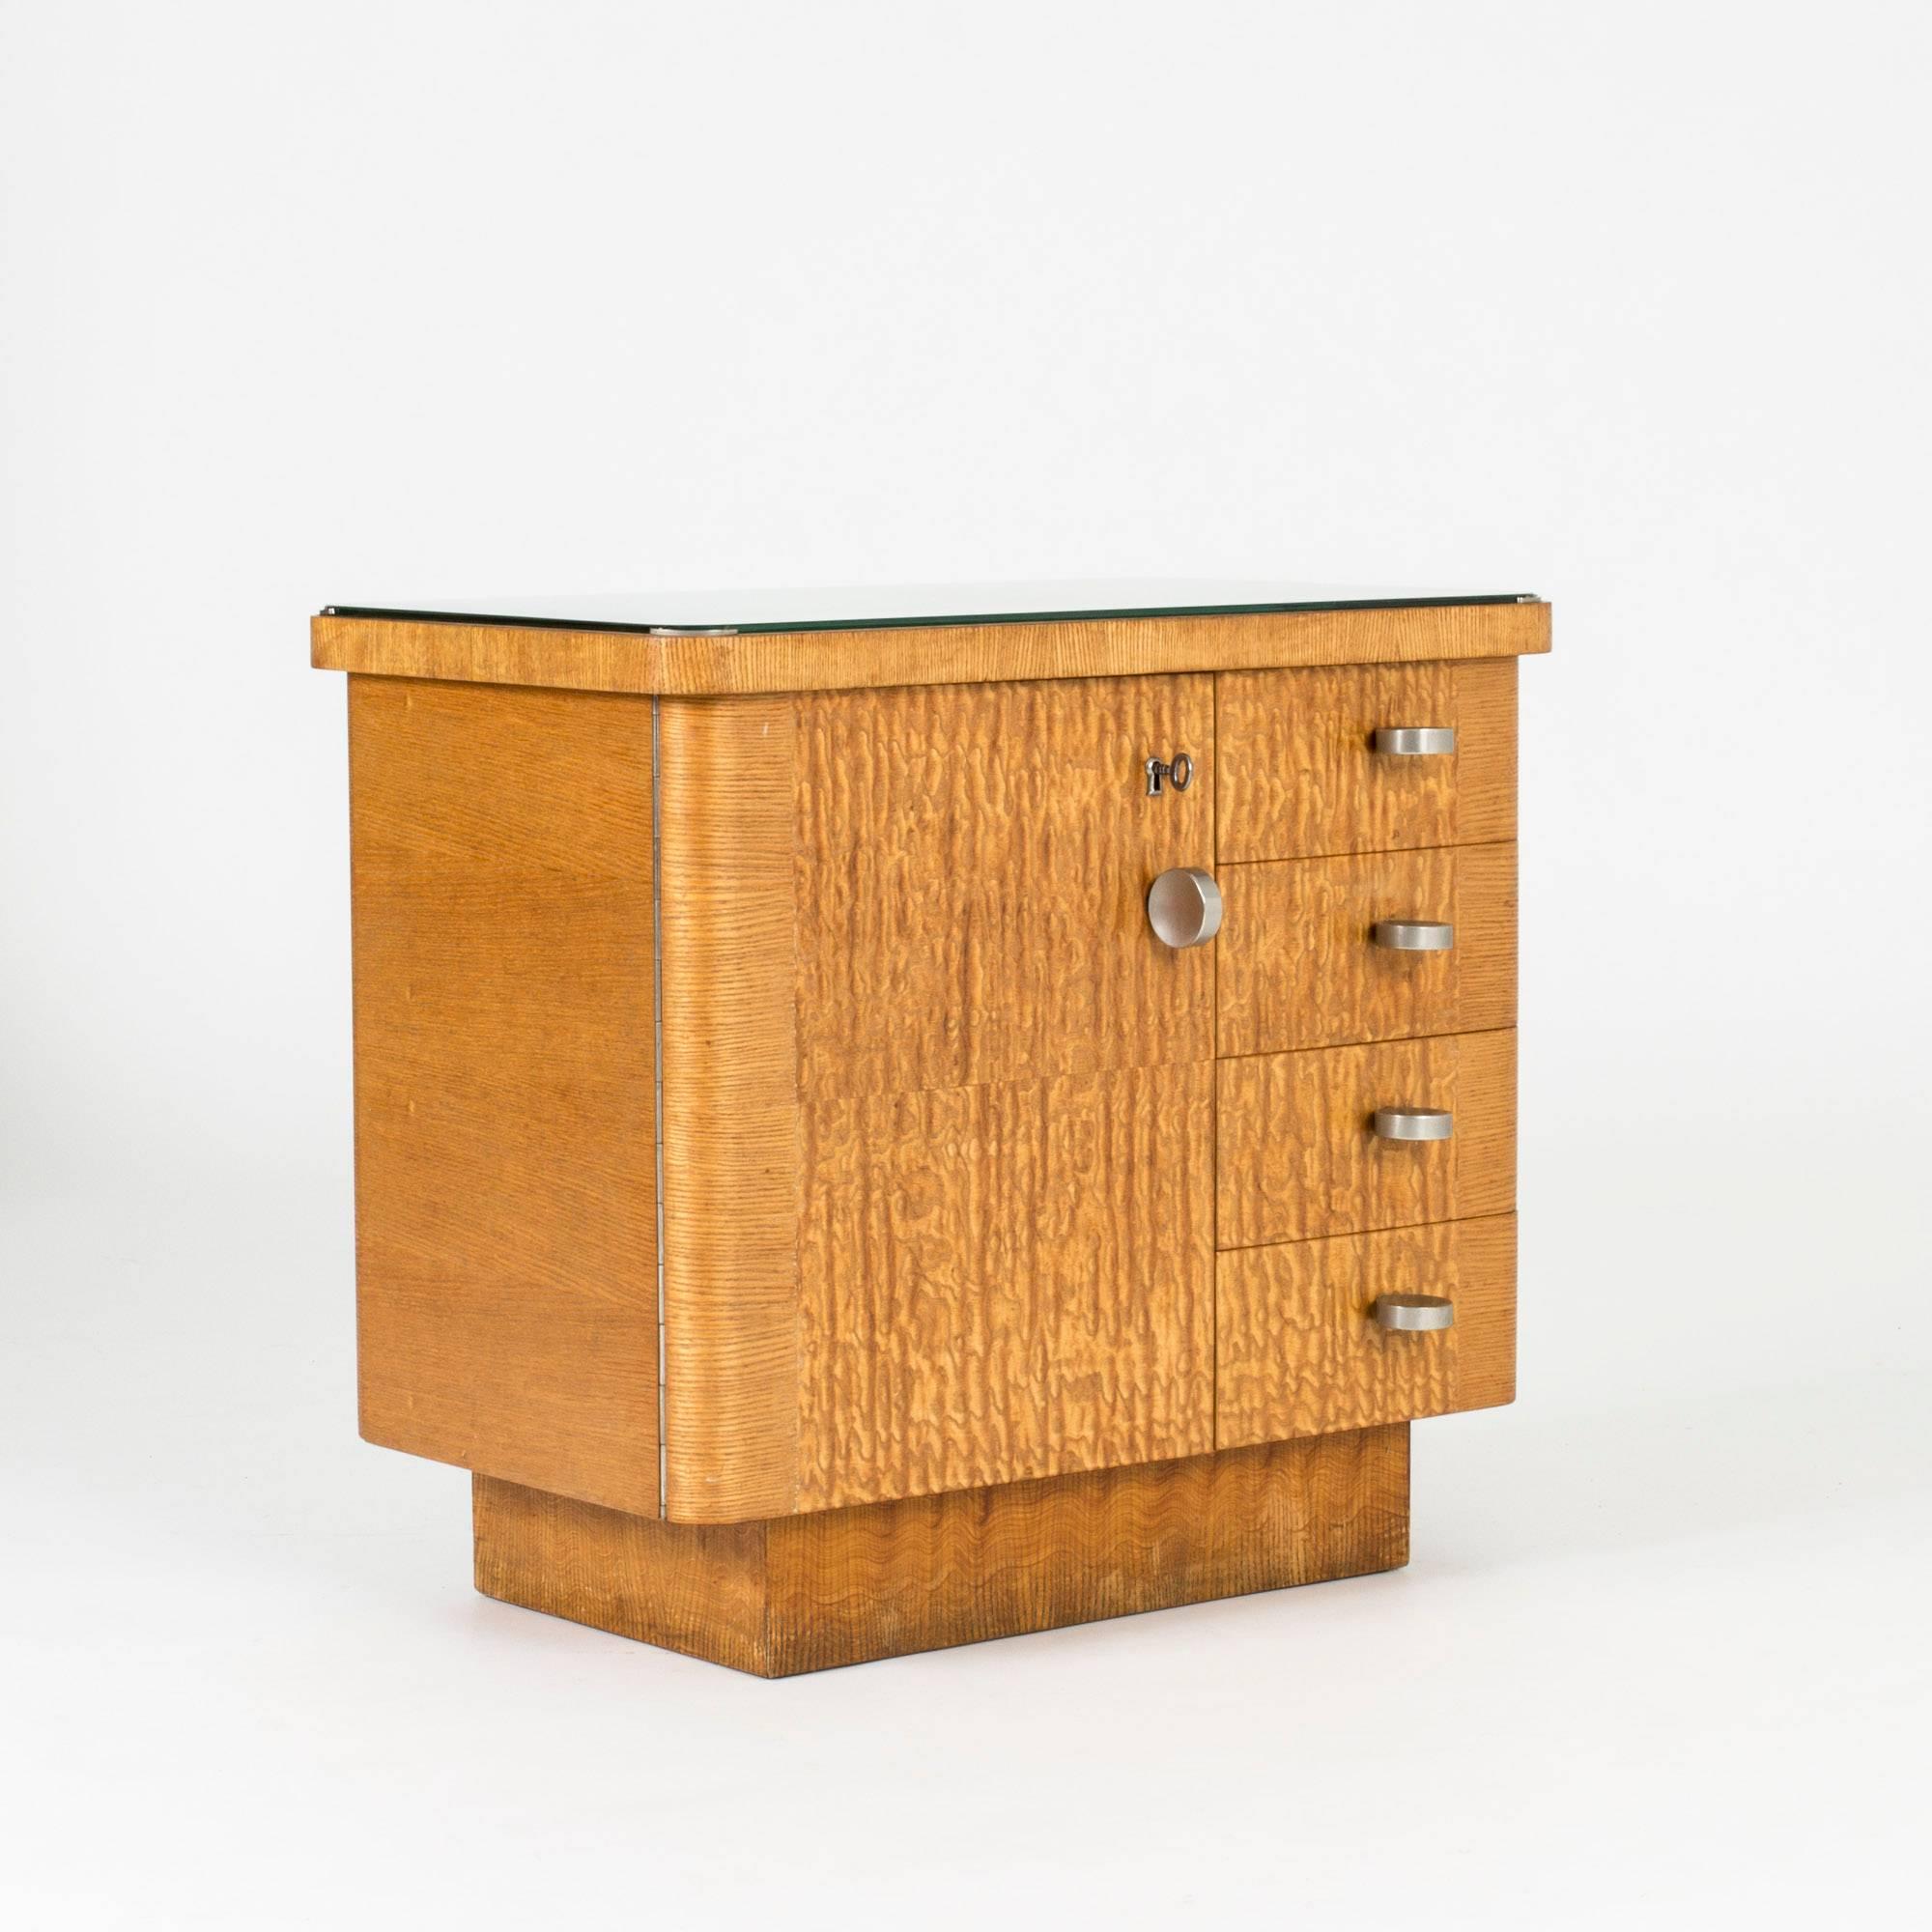 Sophisticated functionalist chest of drawers, made in Sweden in the 1930s. The clean-cut design with root veneer has great details in the well-made metal rims holding the glass in place, brushed-steel handles and hinges running along the entire